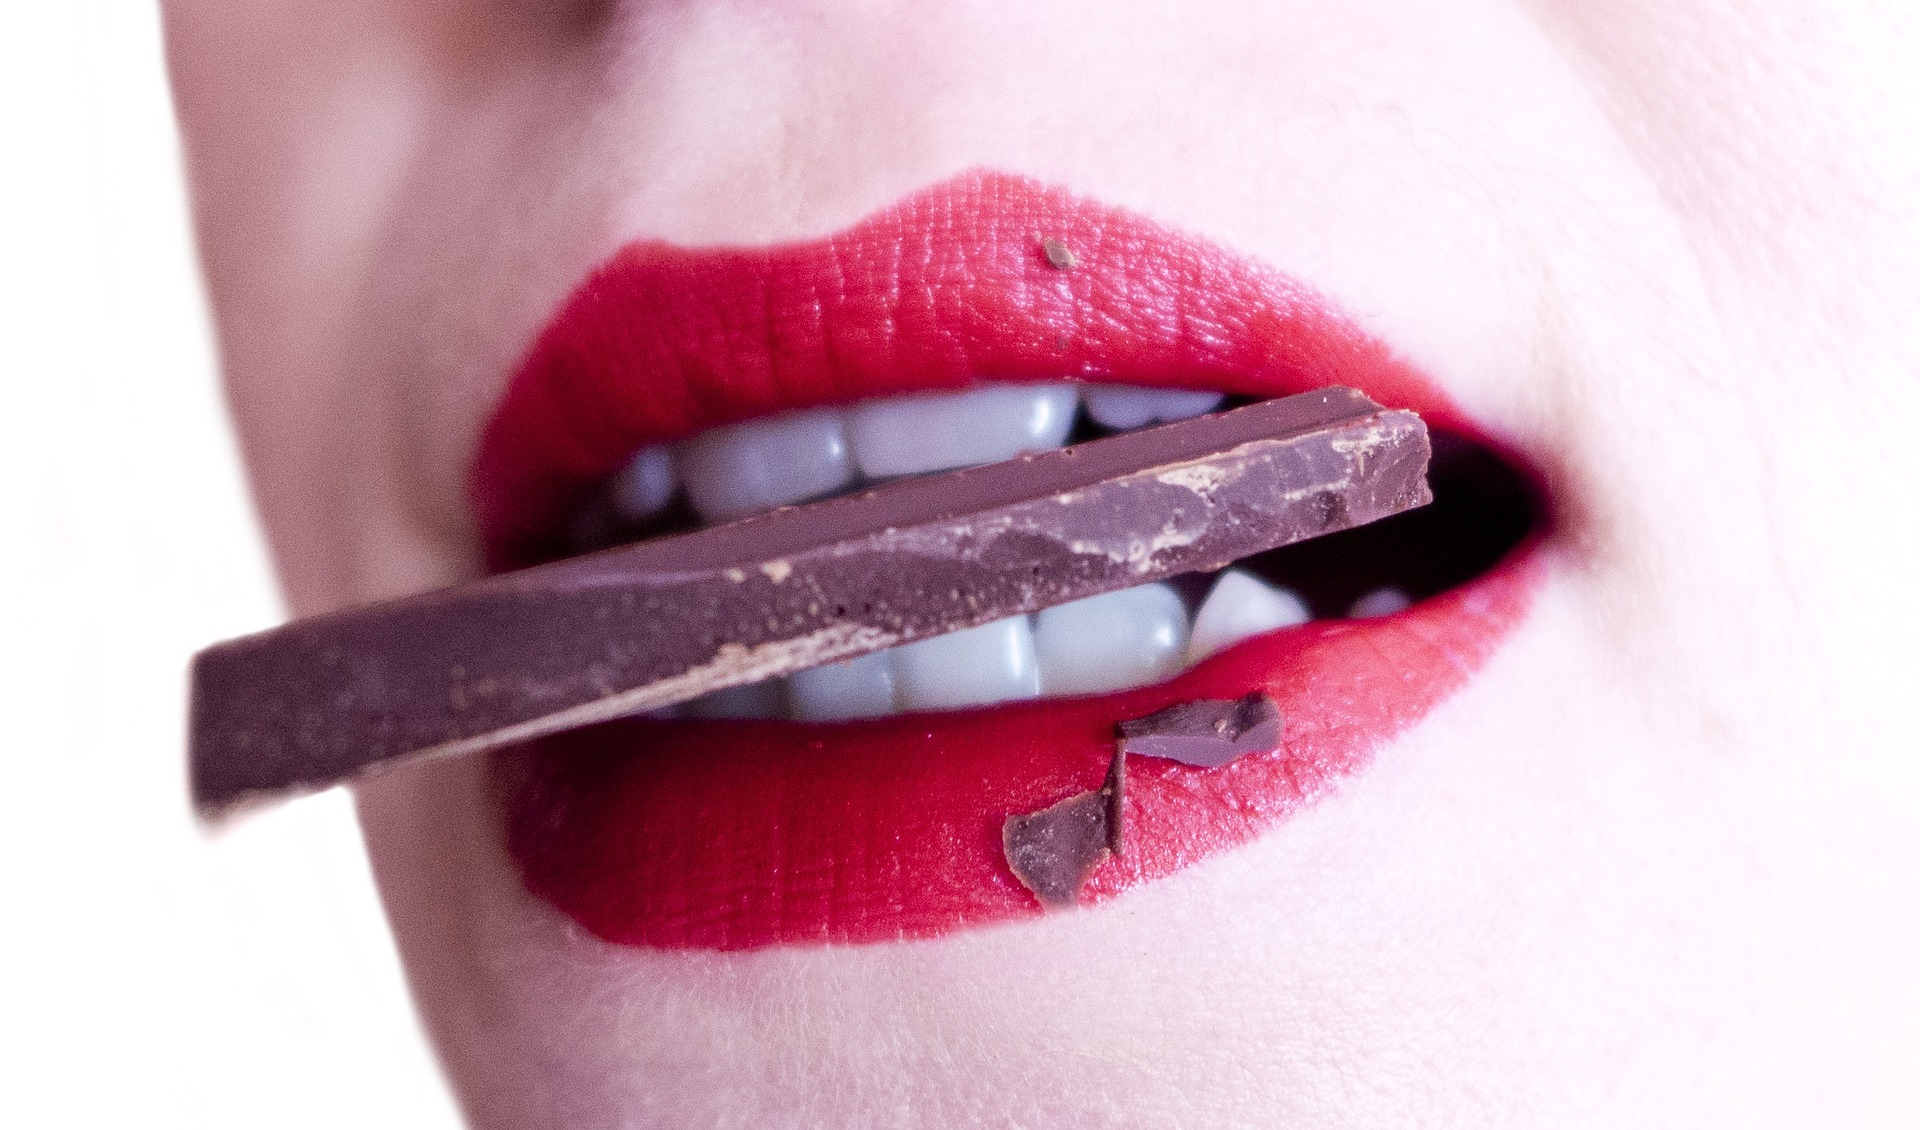 Chocolate as a means of murder? (Image by aleksandra85foto from Pixabay)